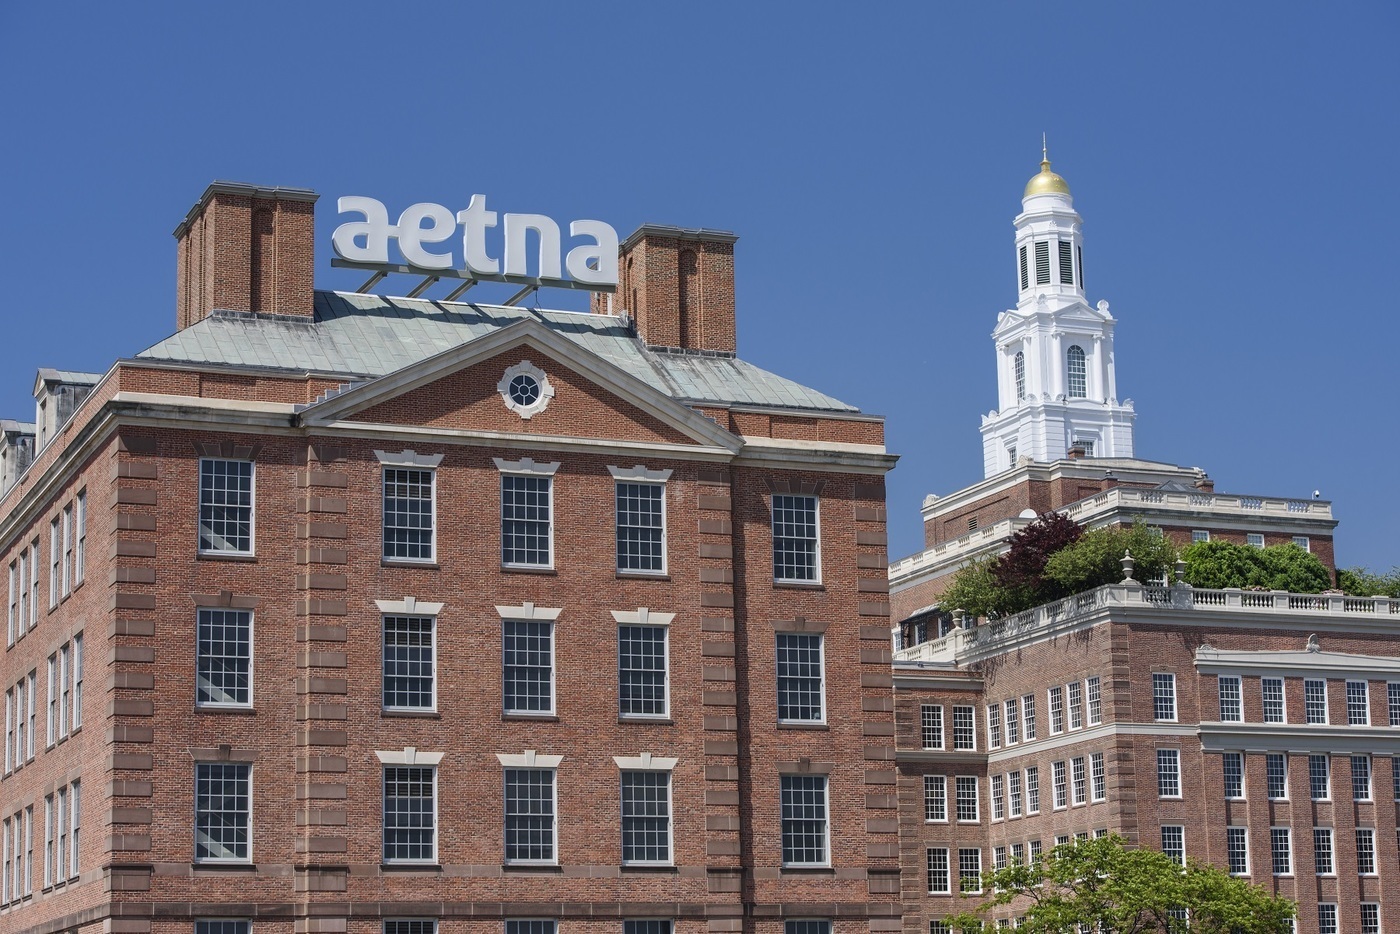 Hire Heroes USA Featured Employer: Aetna